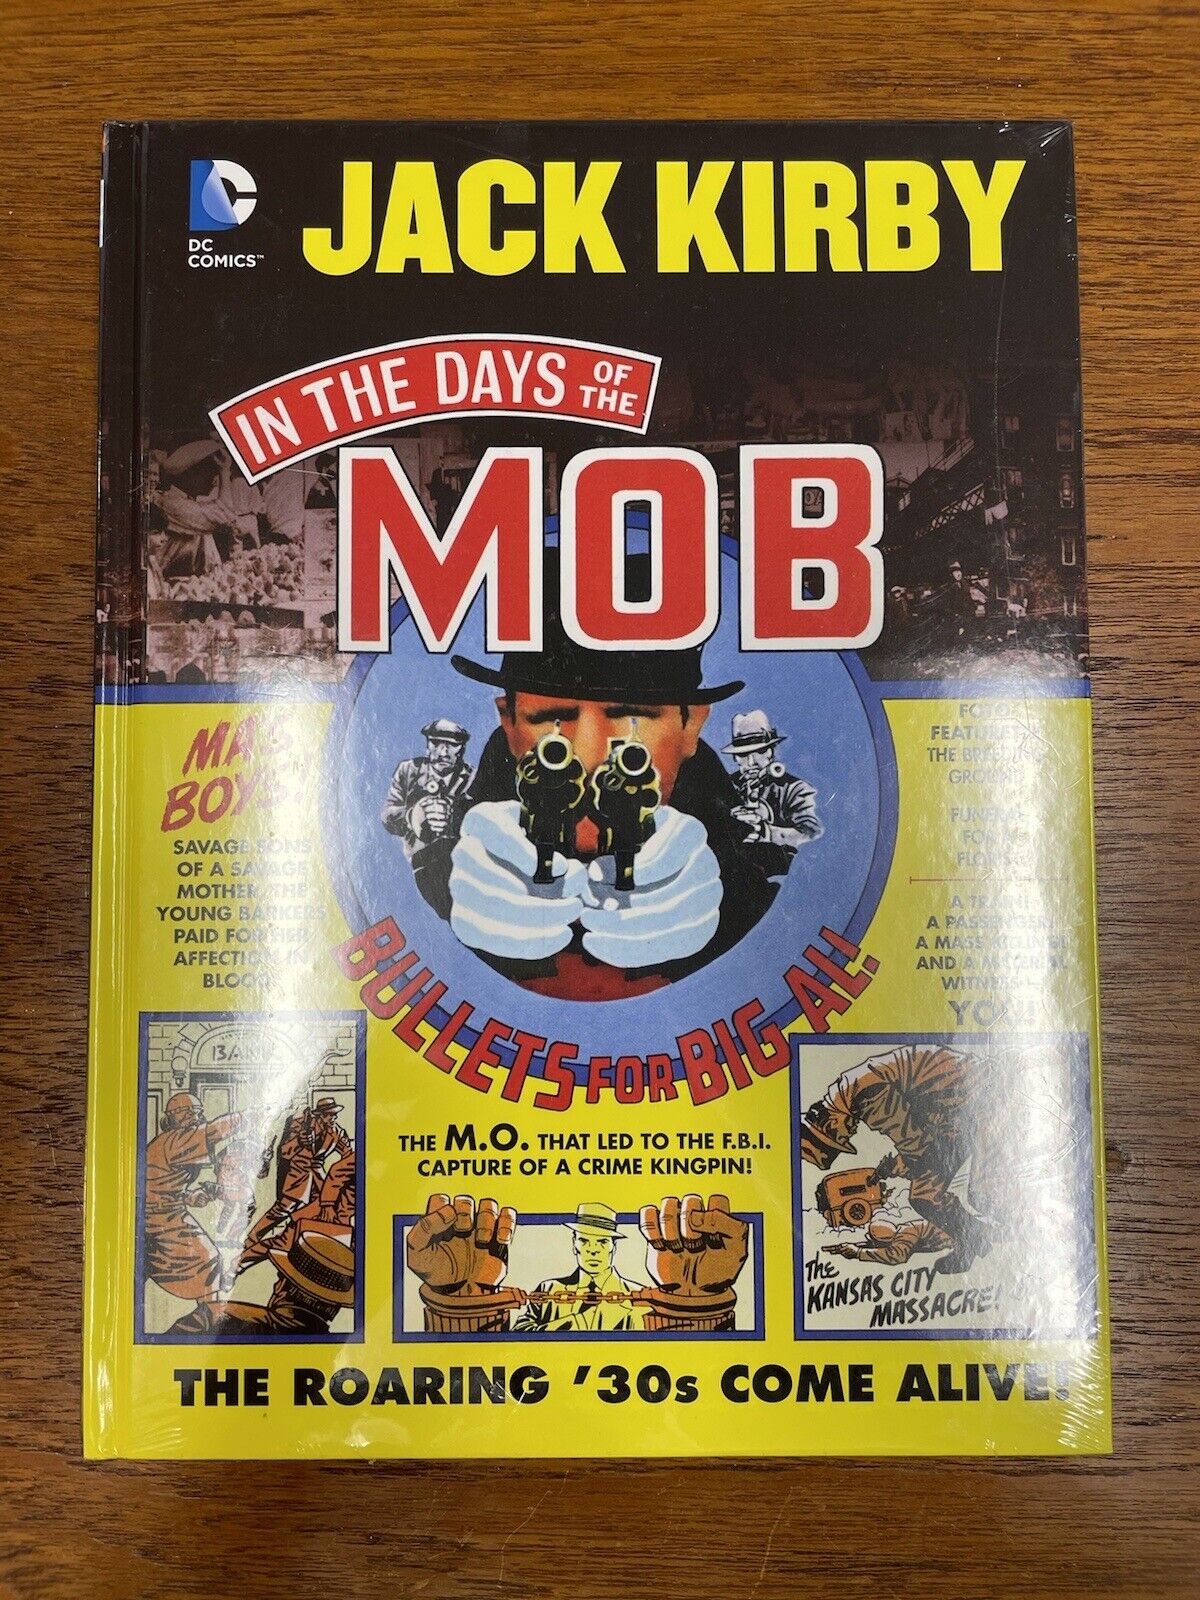 New SEALED Jack Kirby: In the Days of the Mob (DC Comics, 2013) Hardcover